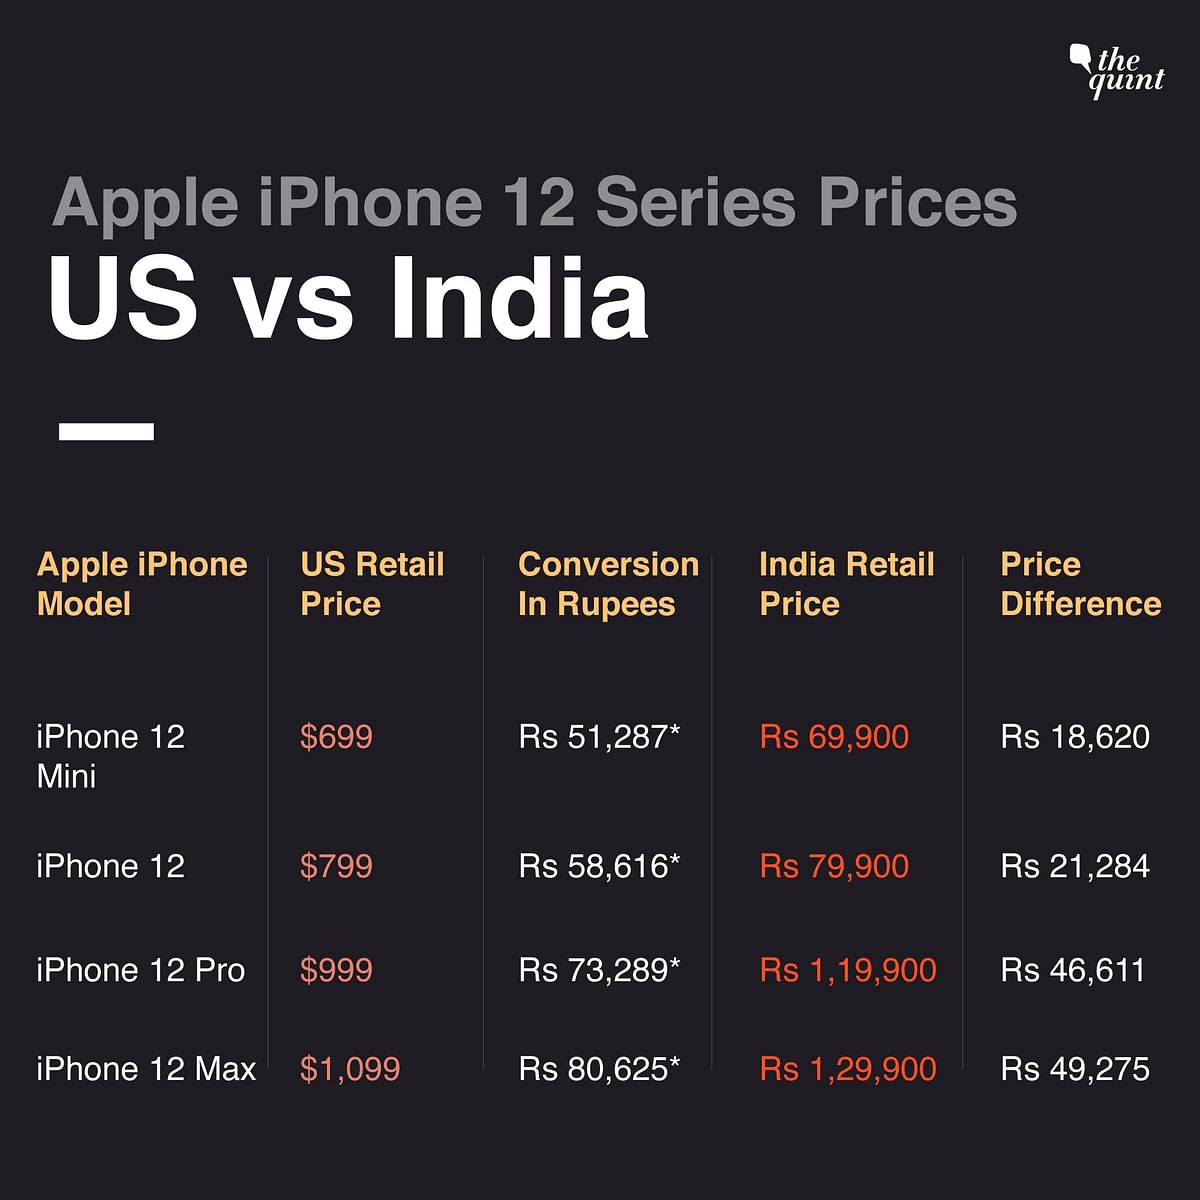 Indian customers have to pay almost 40 percent more for the iPhone 12 compared to US prices.